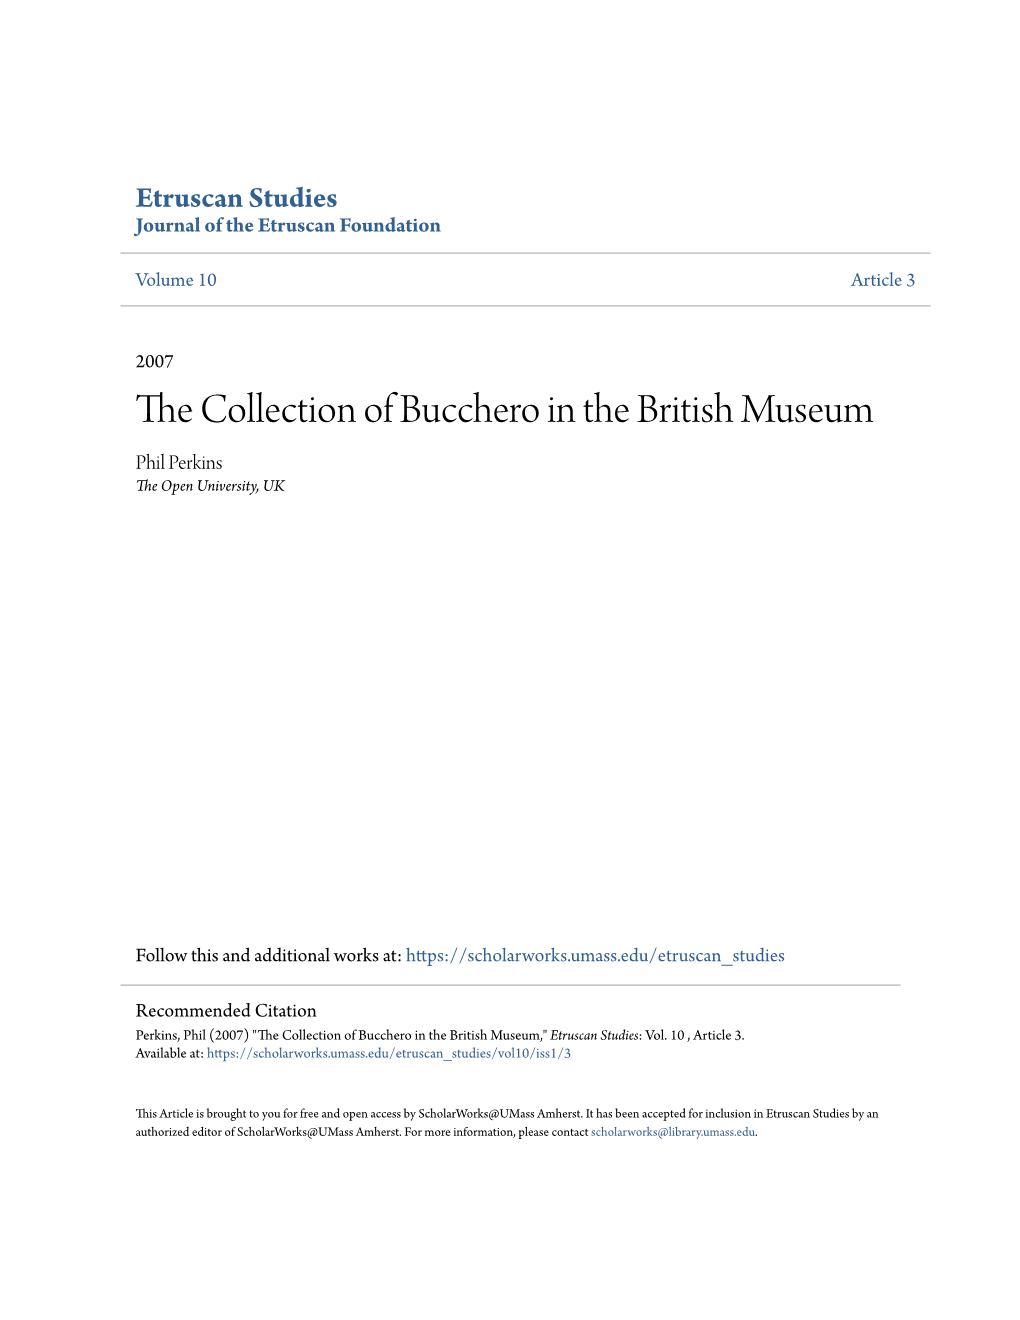 The Collection of Bucchero in the British Museum